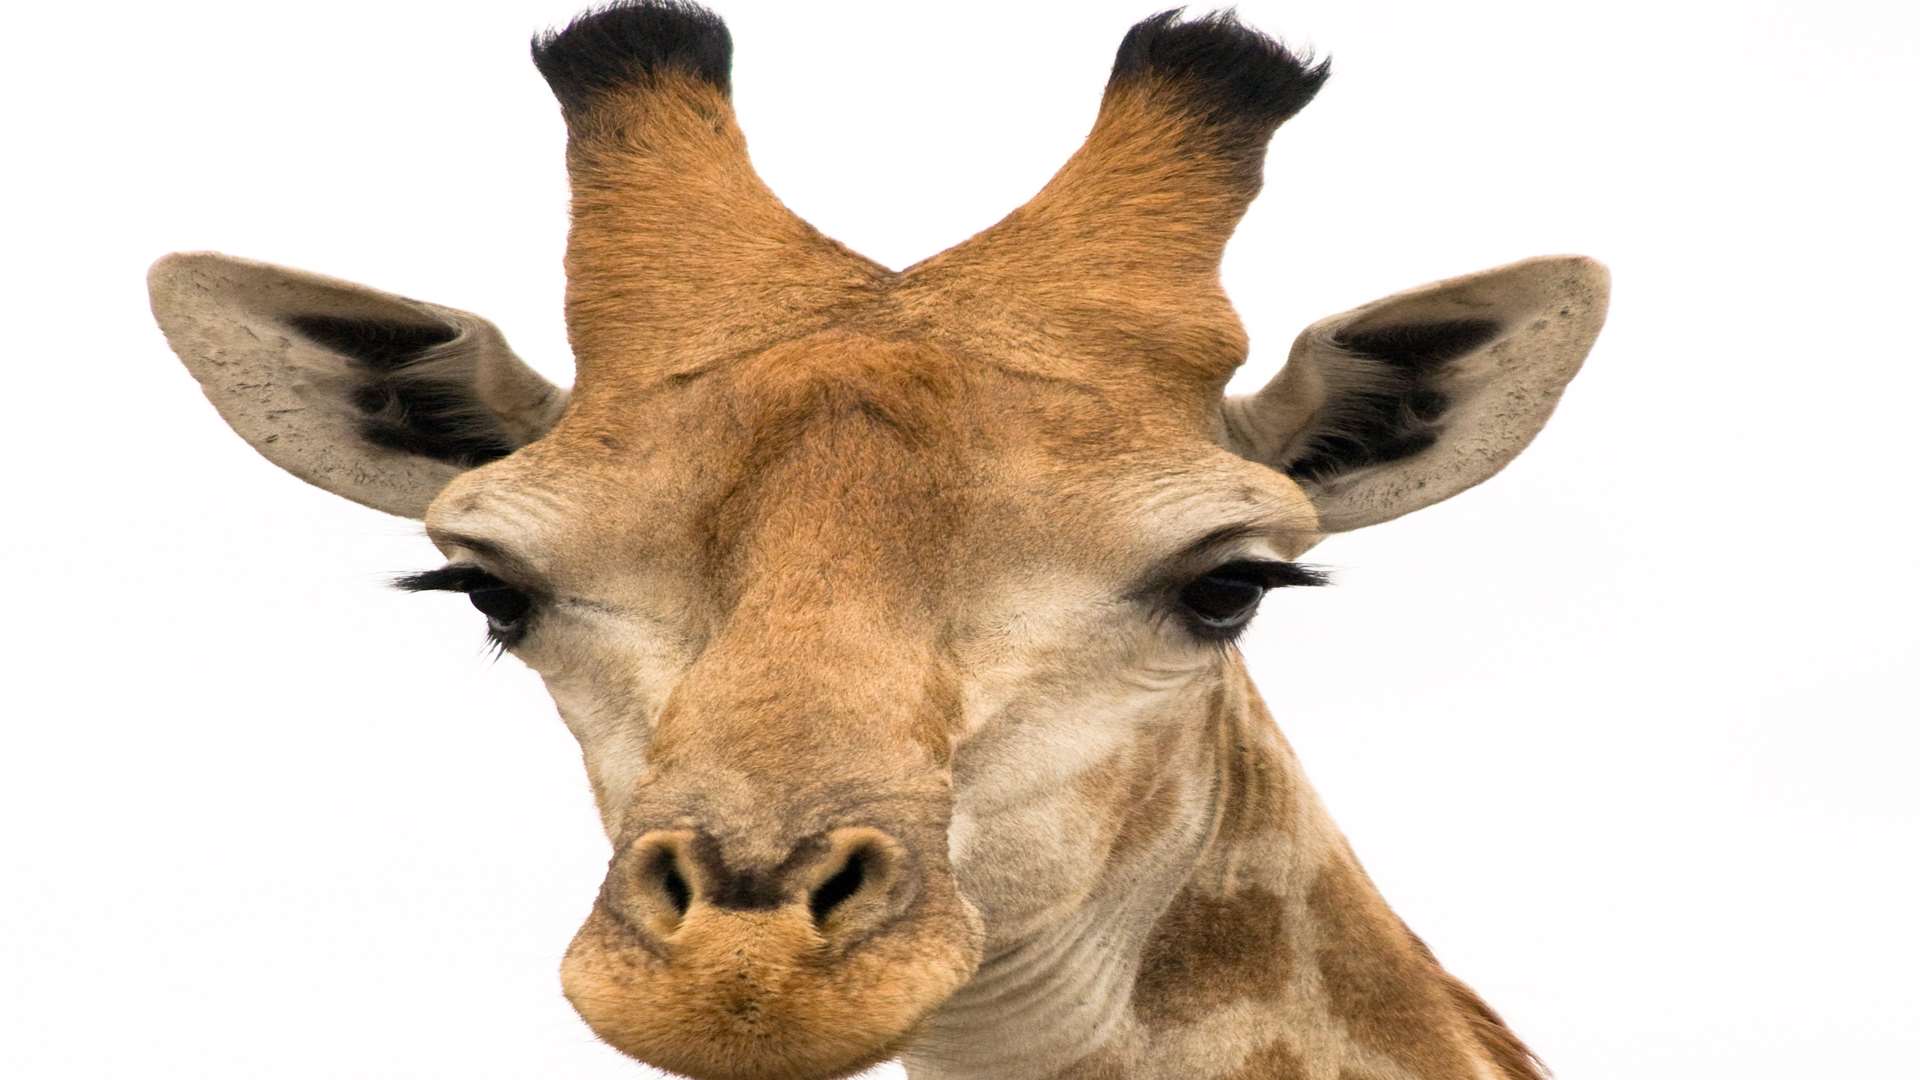 Meet some giraffes and join in with the activities at Port Lympne Reserve